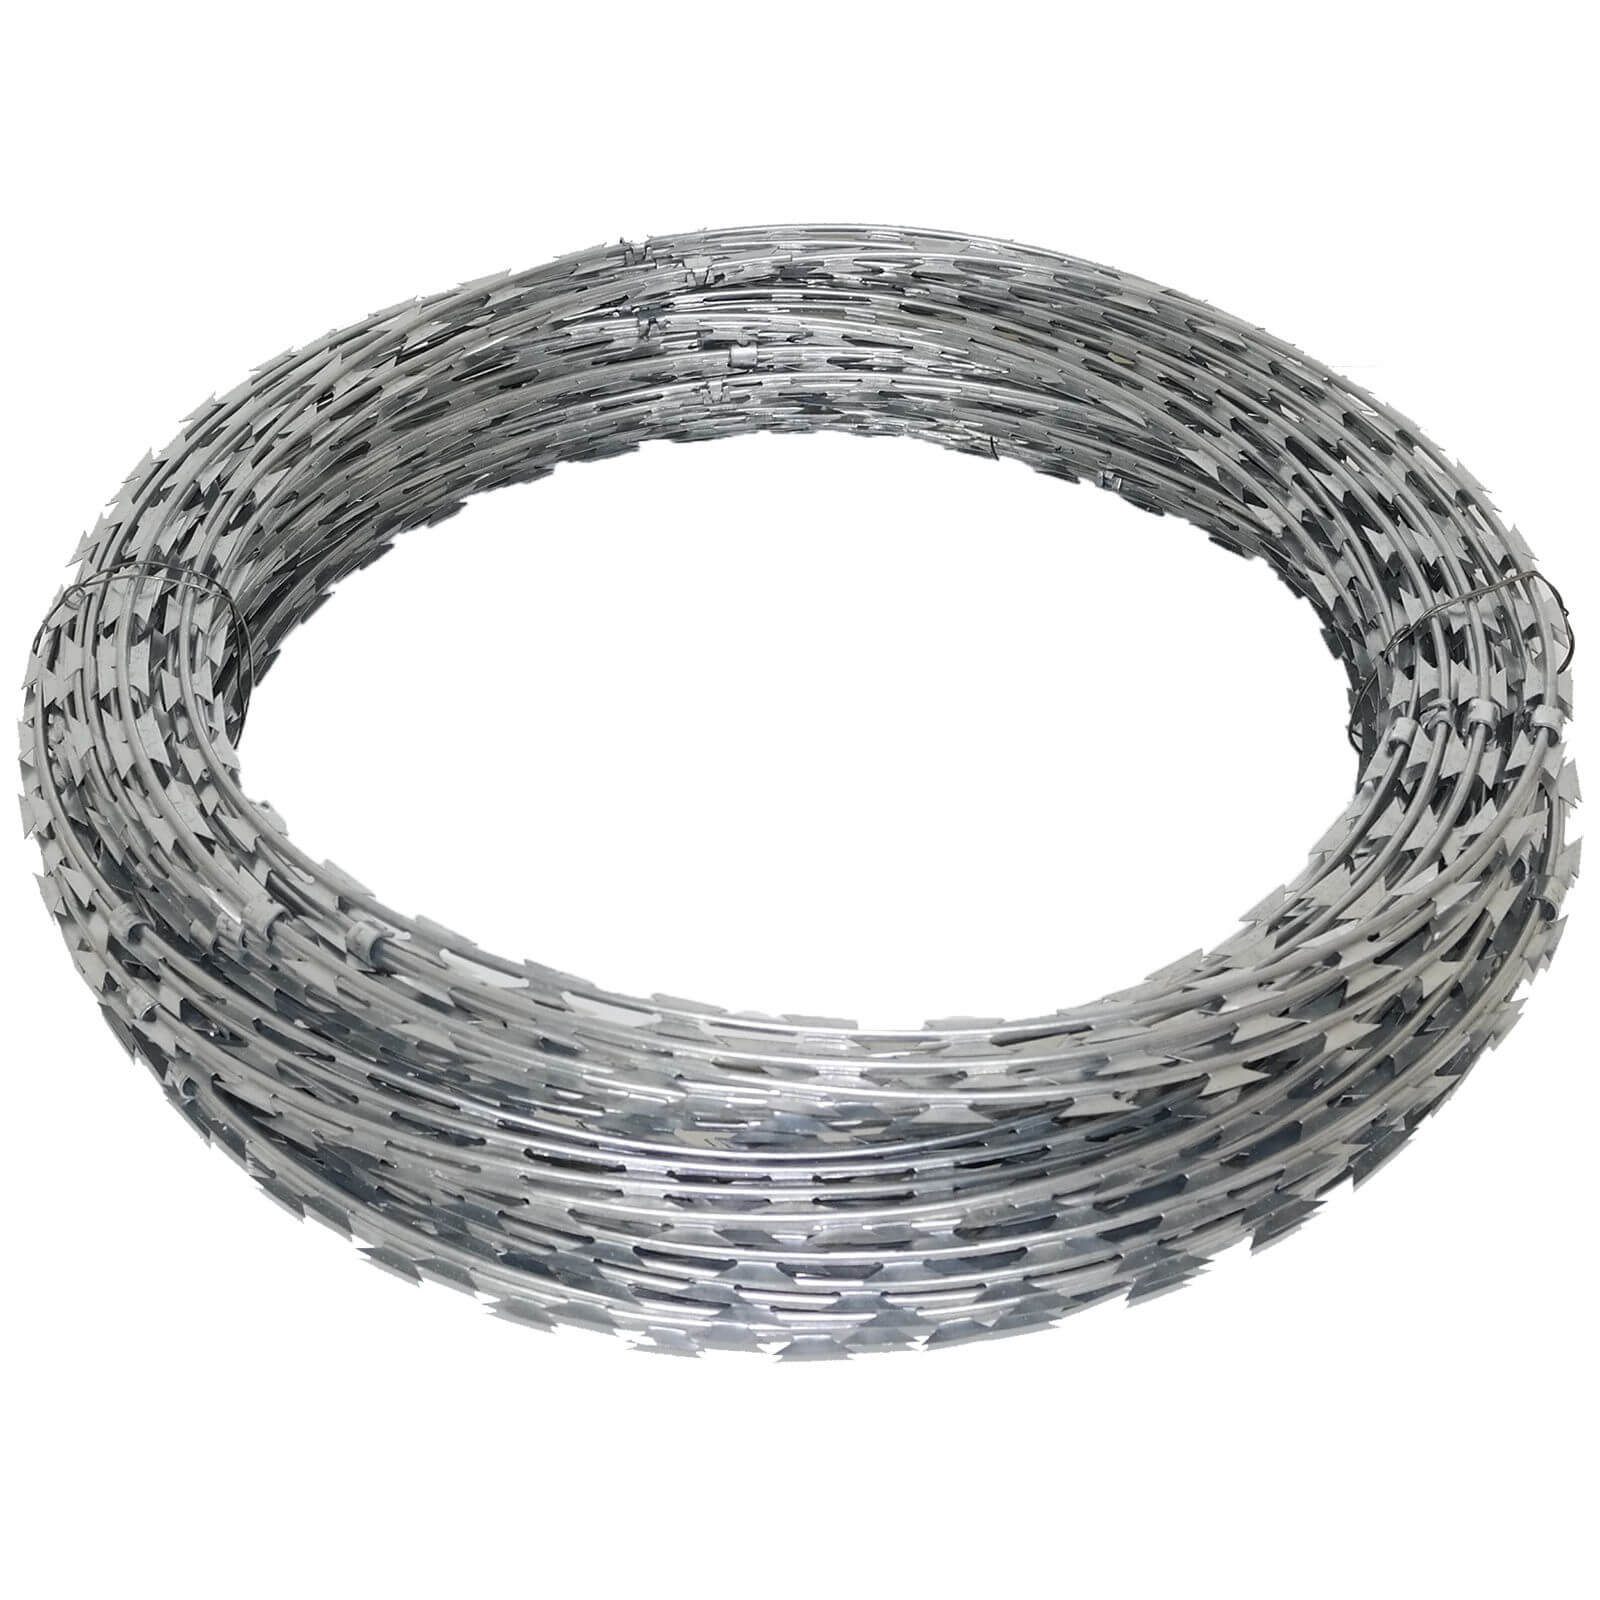 Concertina razor coil: Defending Your Property with High-Quality Barbed Wire Coil